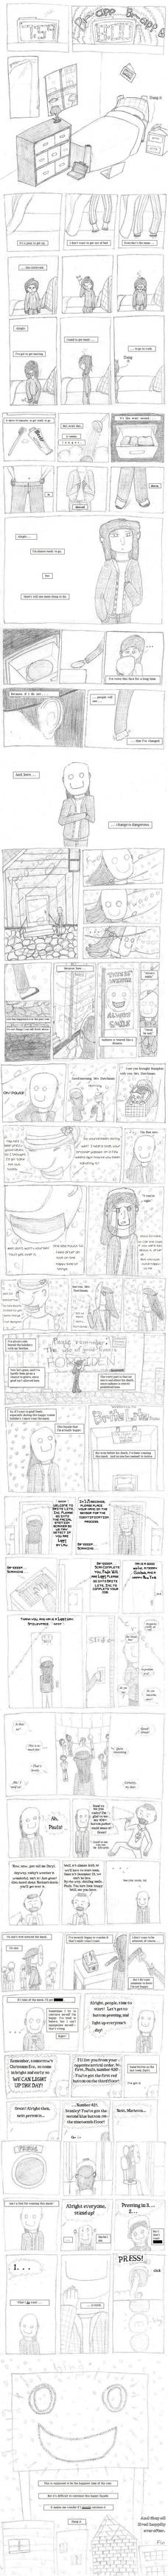 Tapastic Winterfest Comic (No Title Yet) by NVZgirl